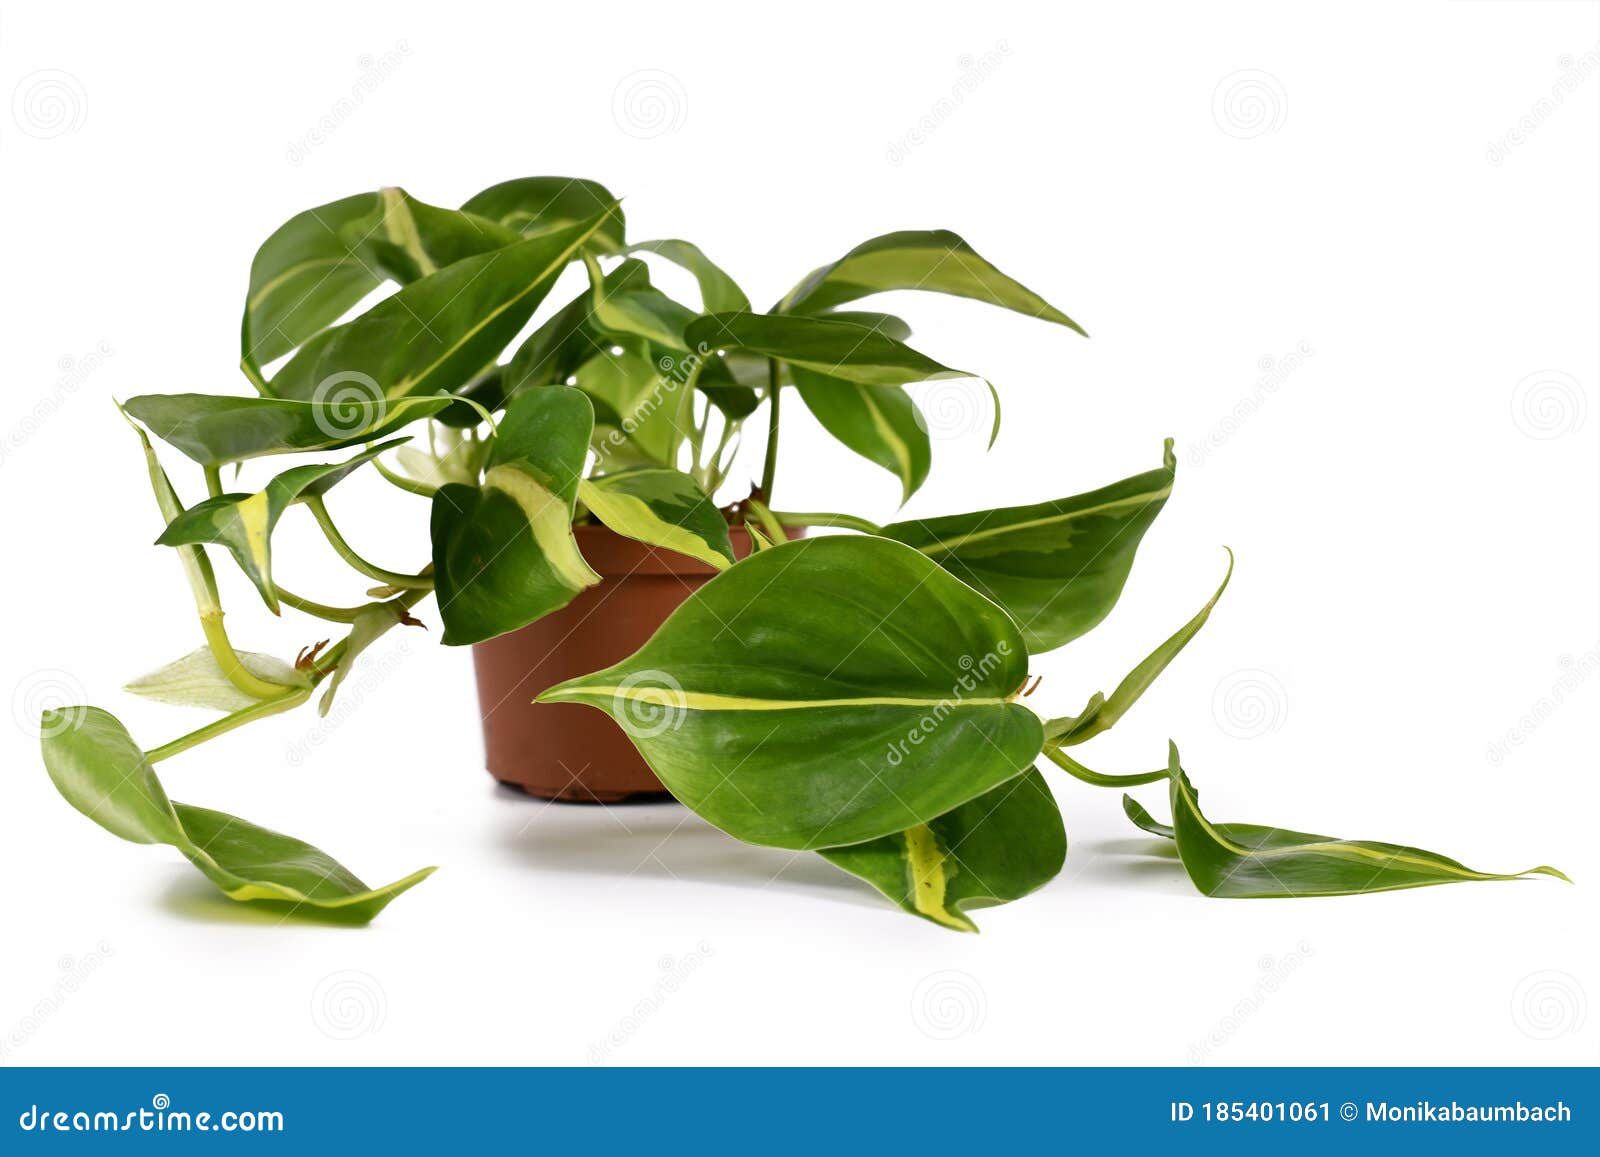 `philodendron hederaceum scandens brasil` tropical creeper house plant with yellow stripes in flower pot on white background